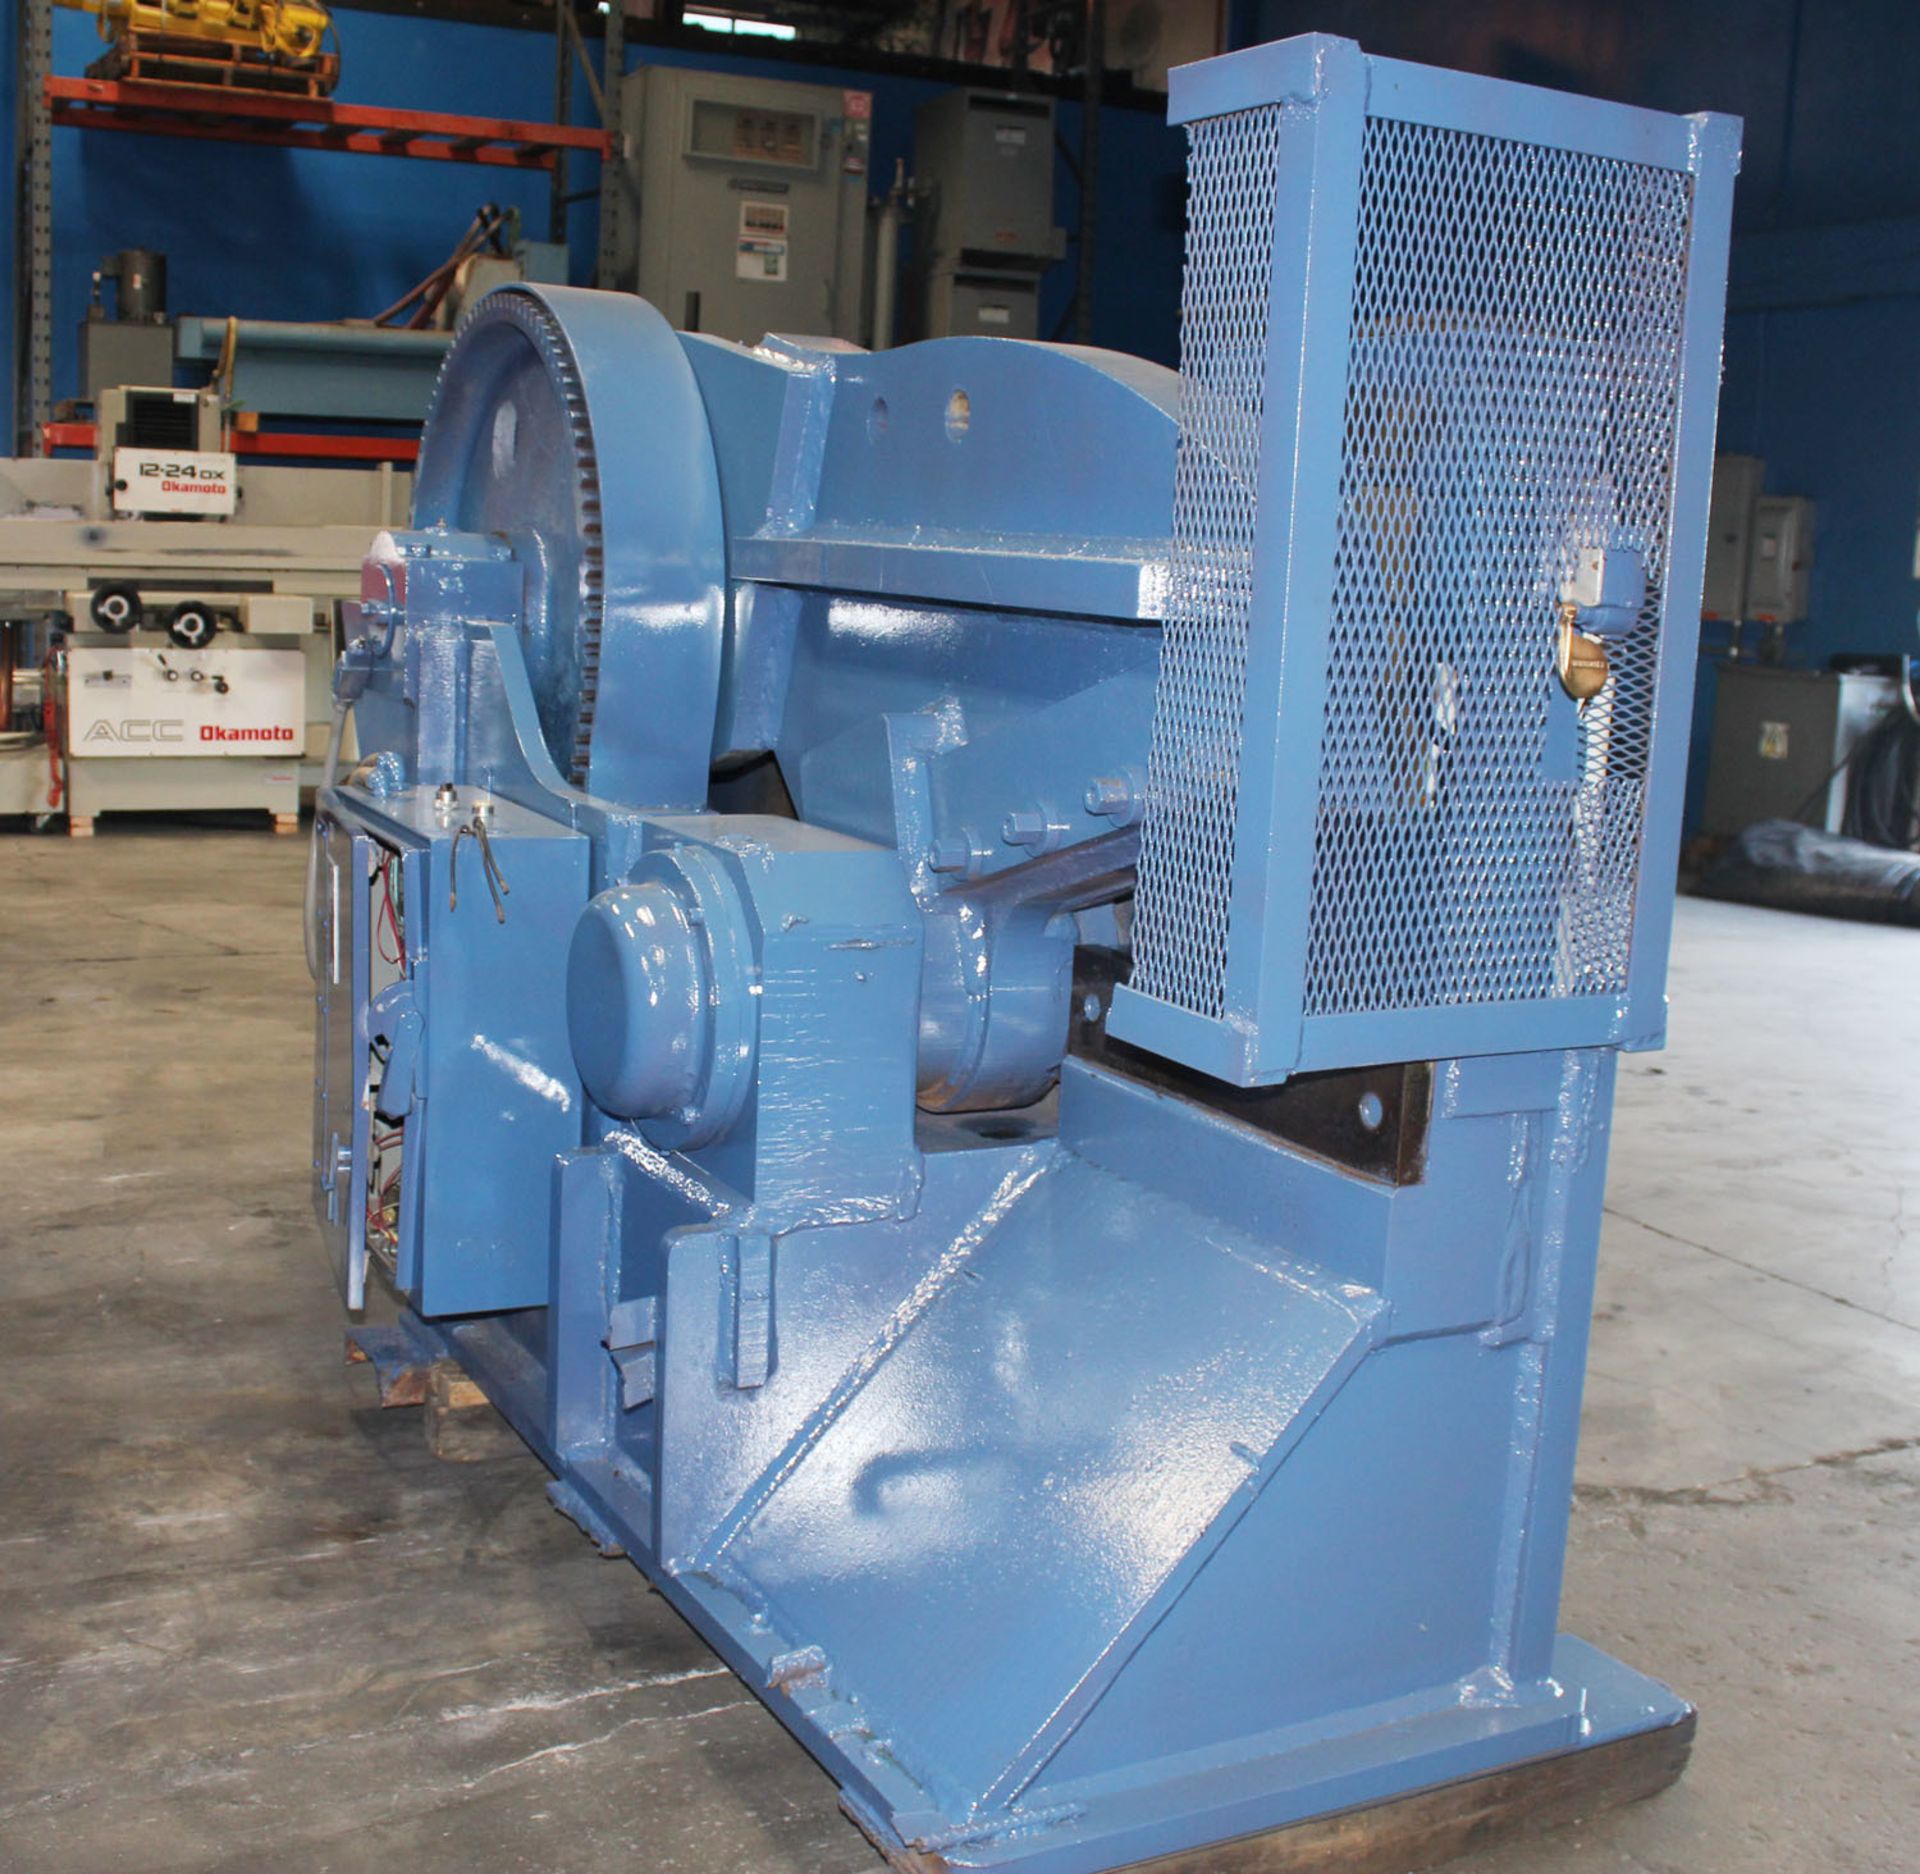 Hill Acme Alligator Shear | 24", Mdl: 22 A, S/N: N/A, Located In: Huntington Park, CA - 4763 - Image 14 of 18